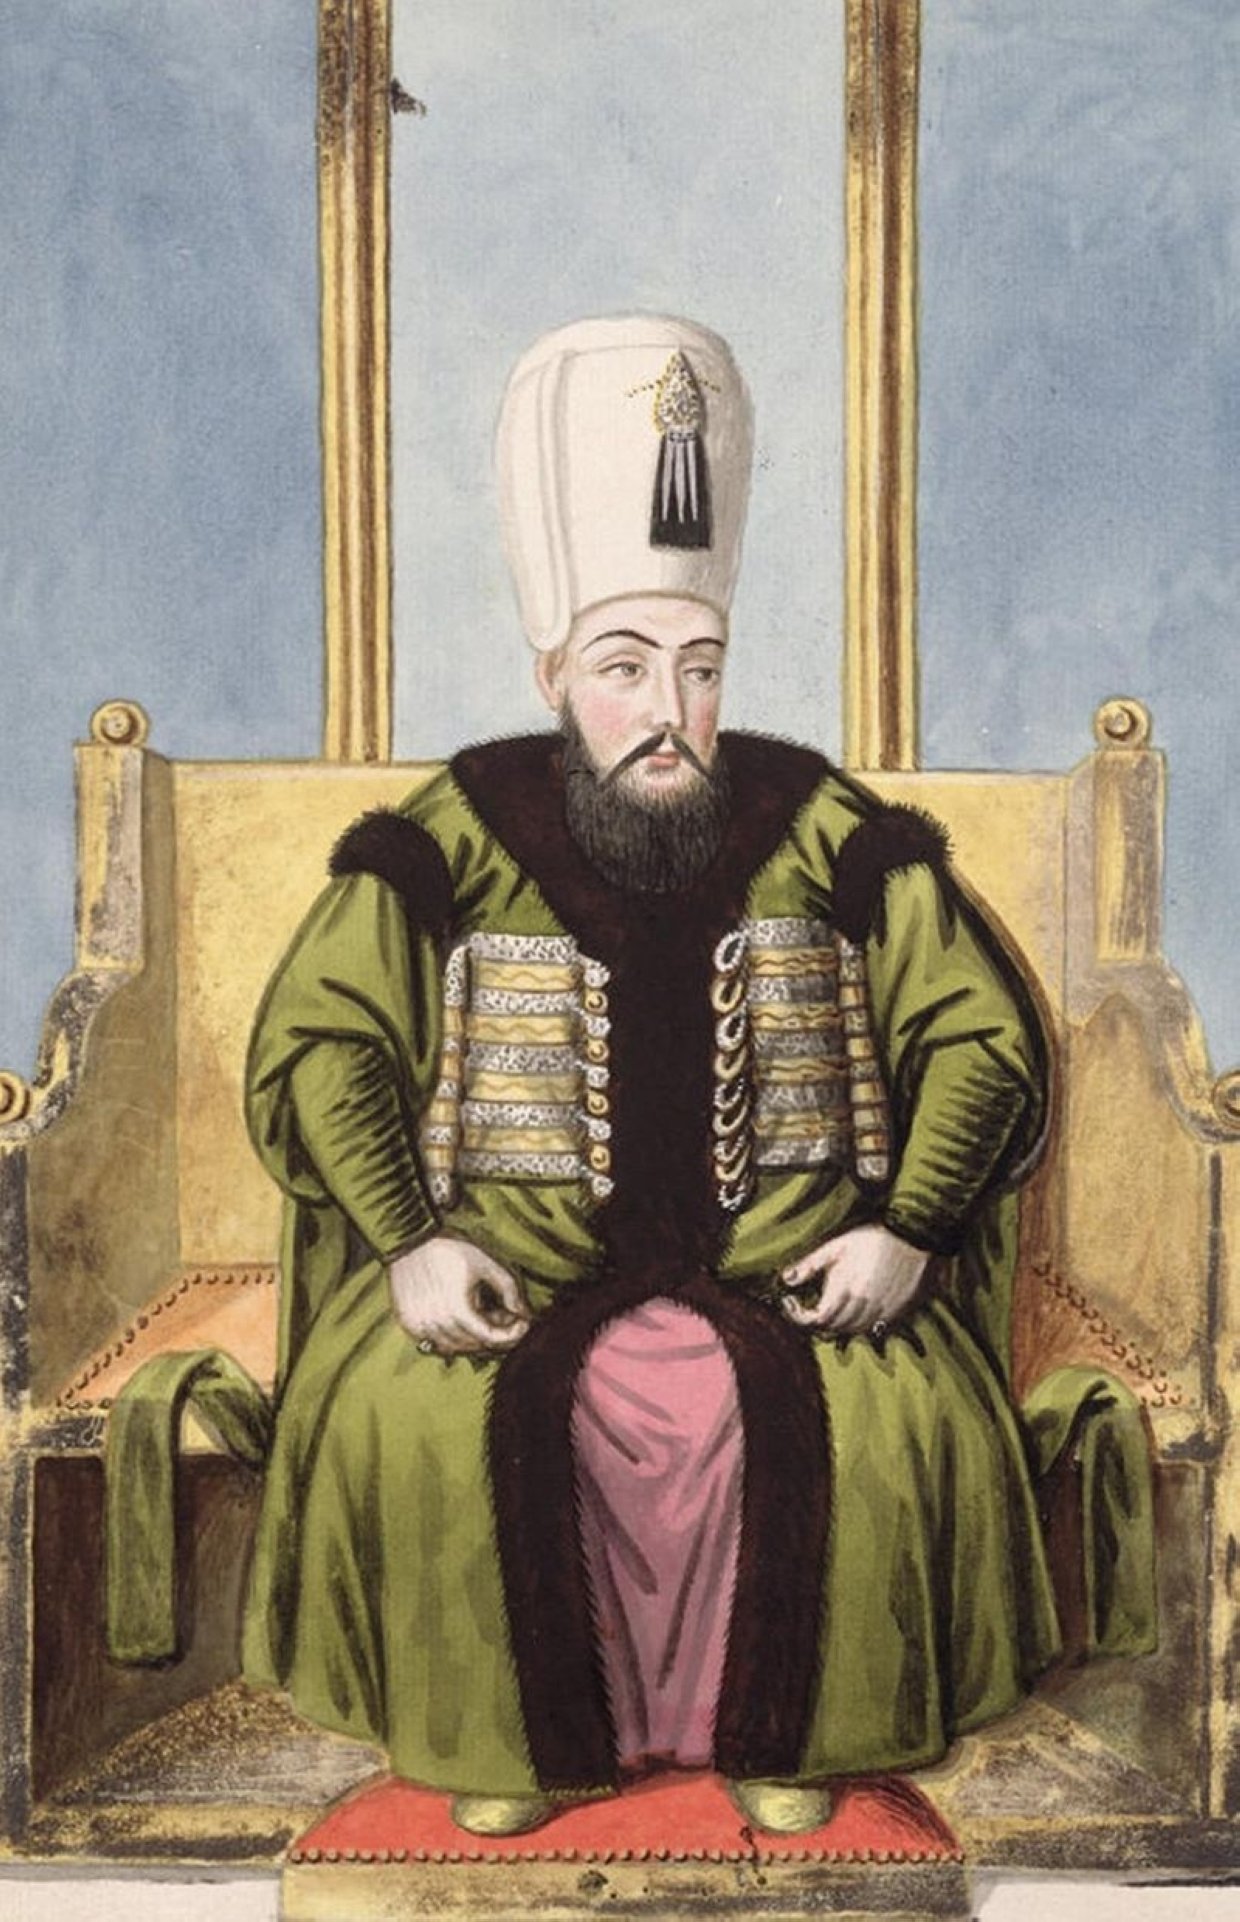 A portrait of Sultan Ahmed I.